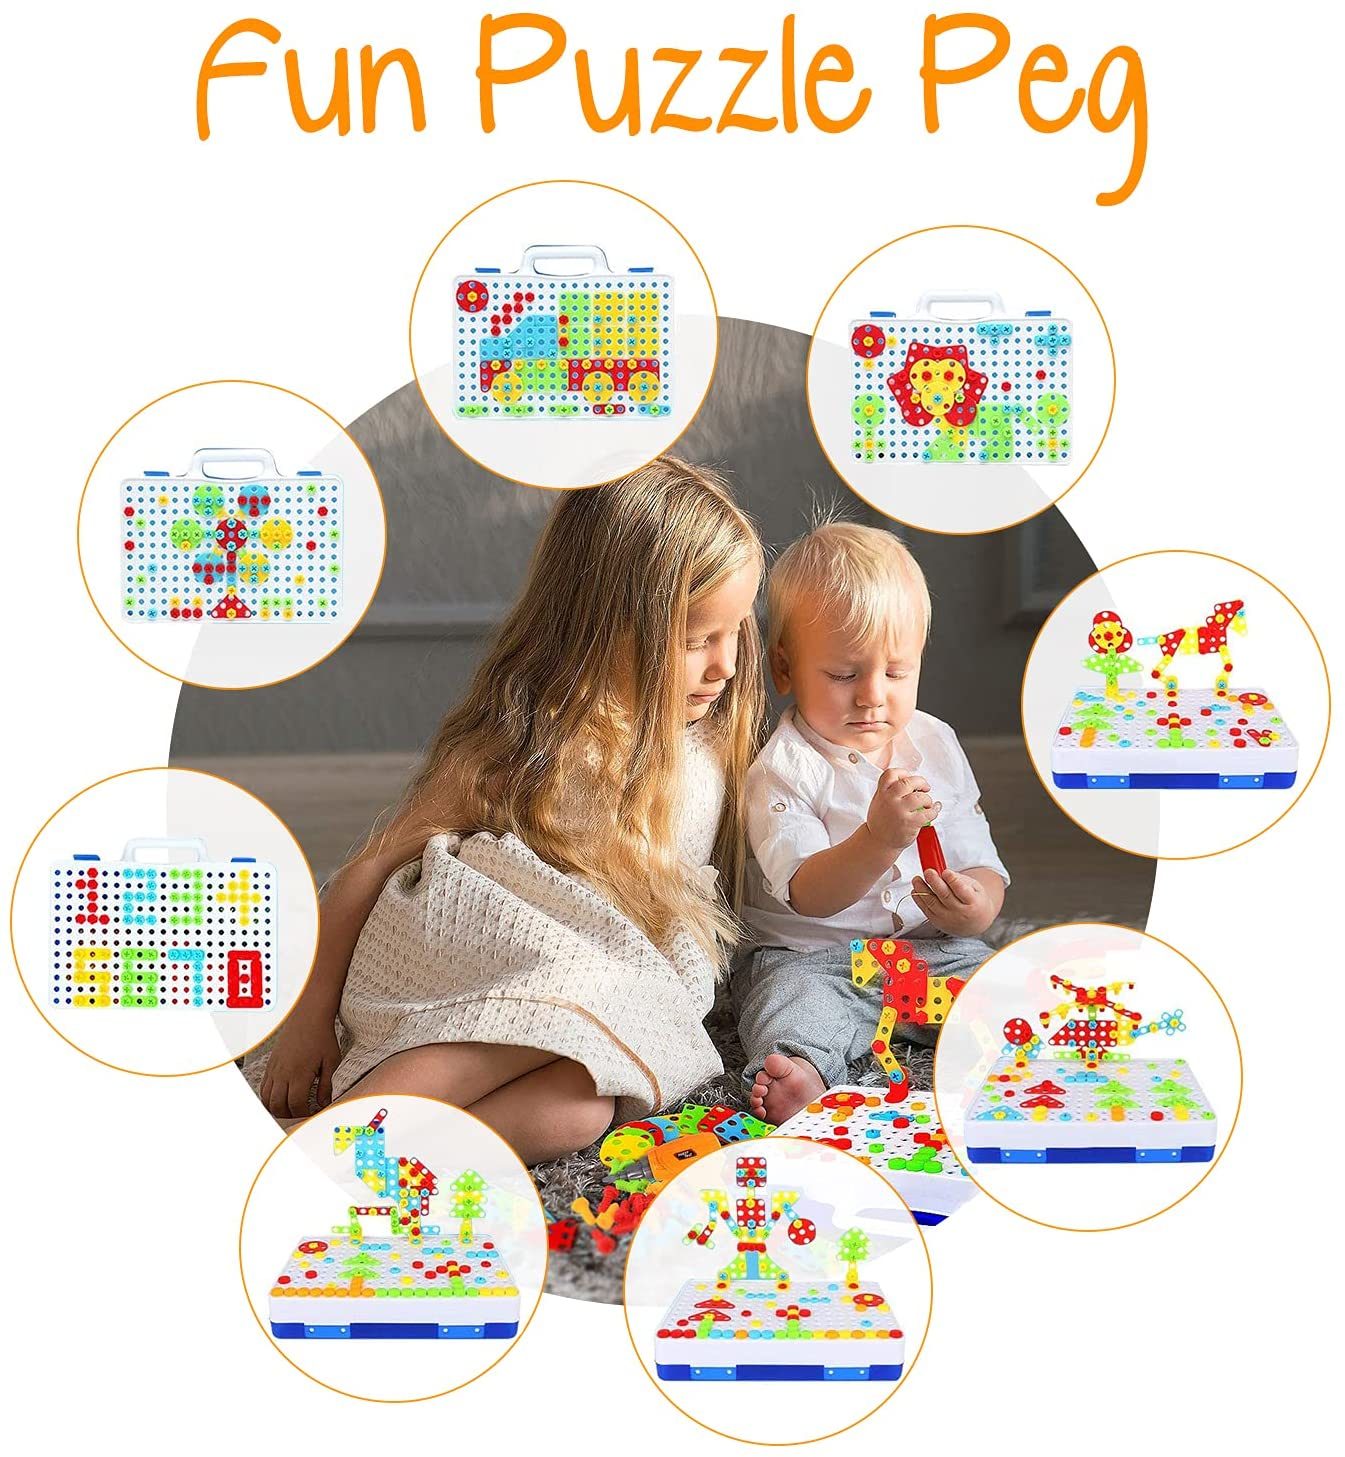 237 Pieces Creative Toy Drill Puzzle Set, STEM Learning Educational Toys, 3D Construction Engineering Building Blocks for Boys and Girls YJ